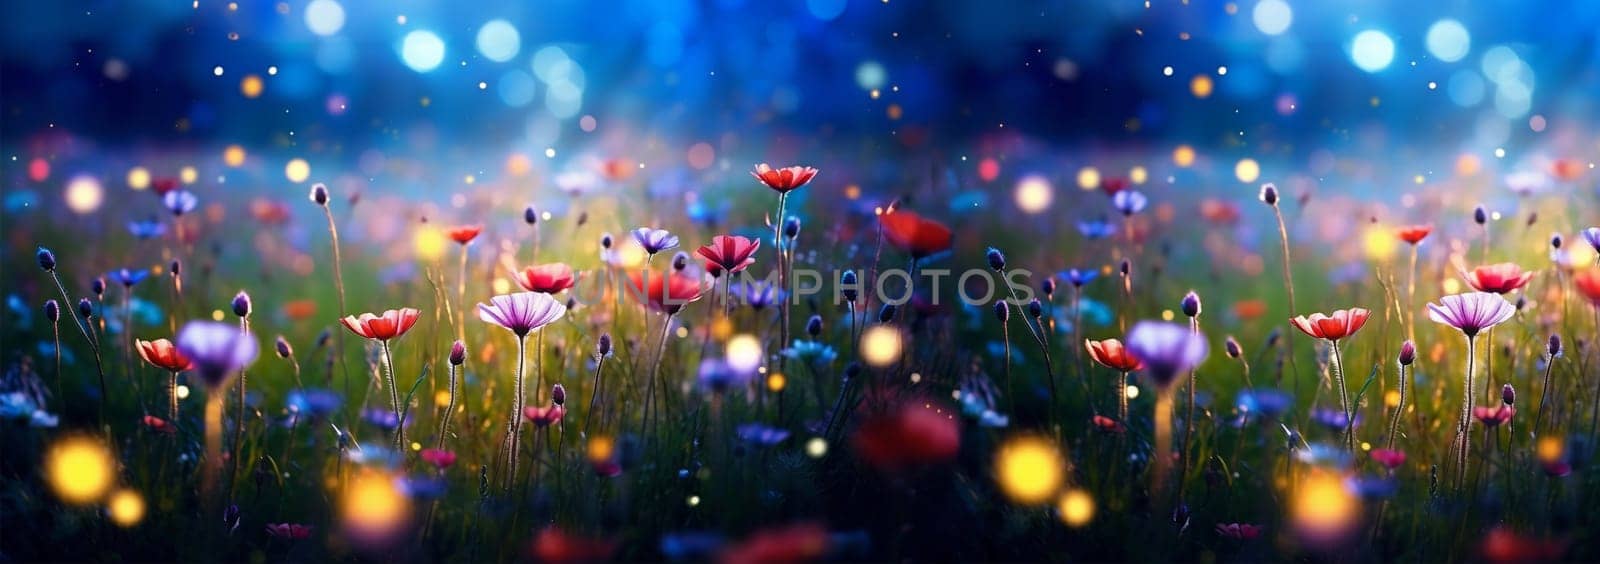 Banner Wild flower field in the night magical lights. Summer meadow. Fantastical fantasy background of magical purple dark night sky with shining bokeh lights copy space by Annebel146